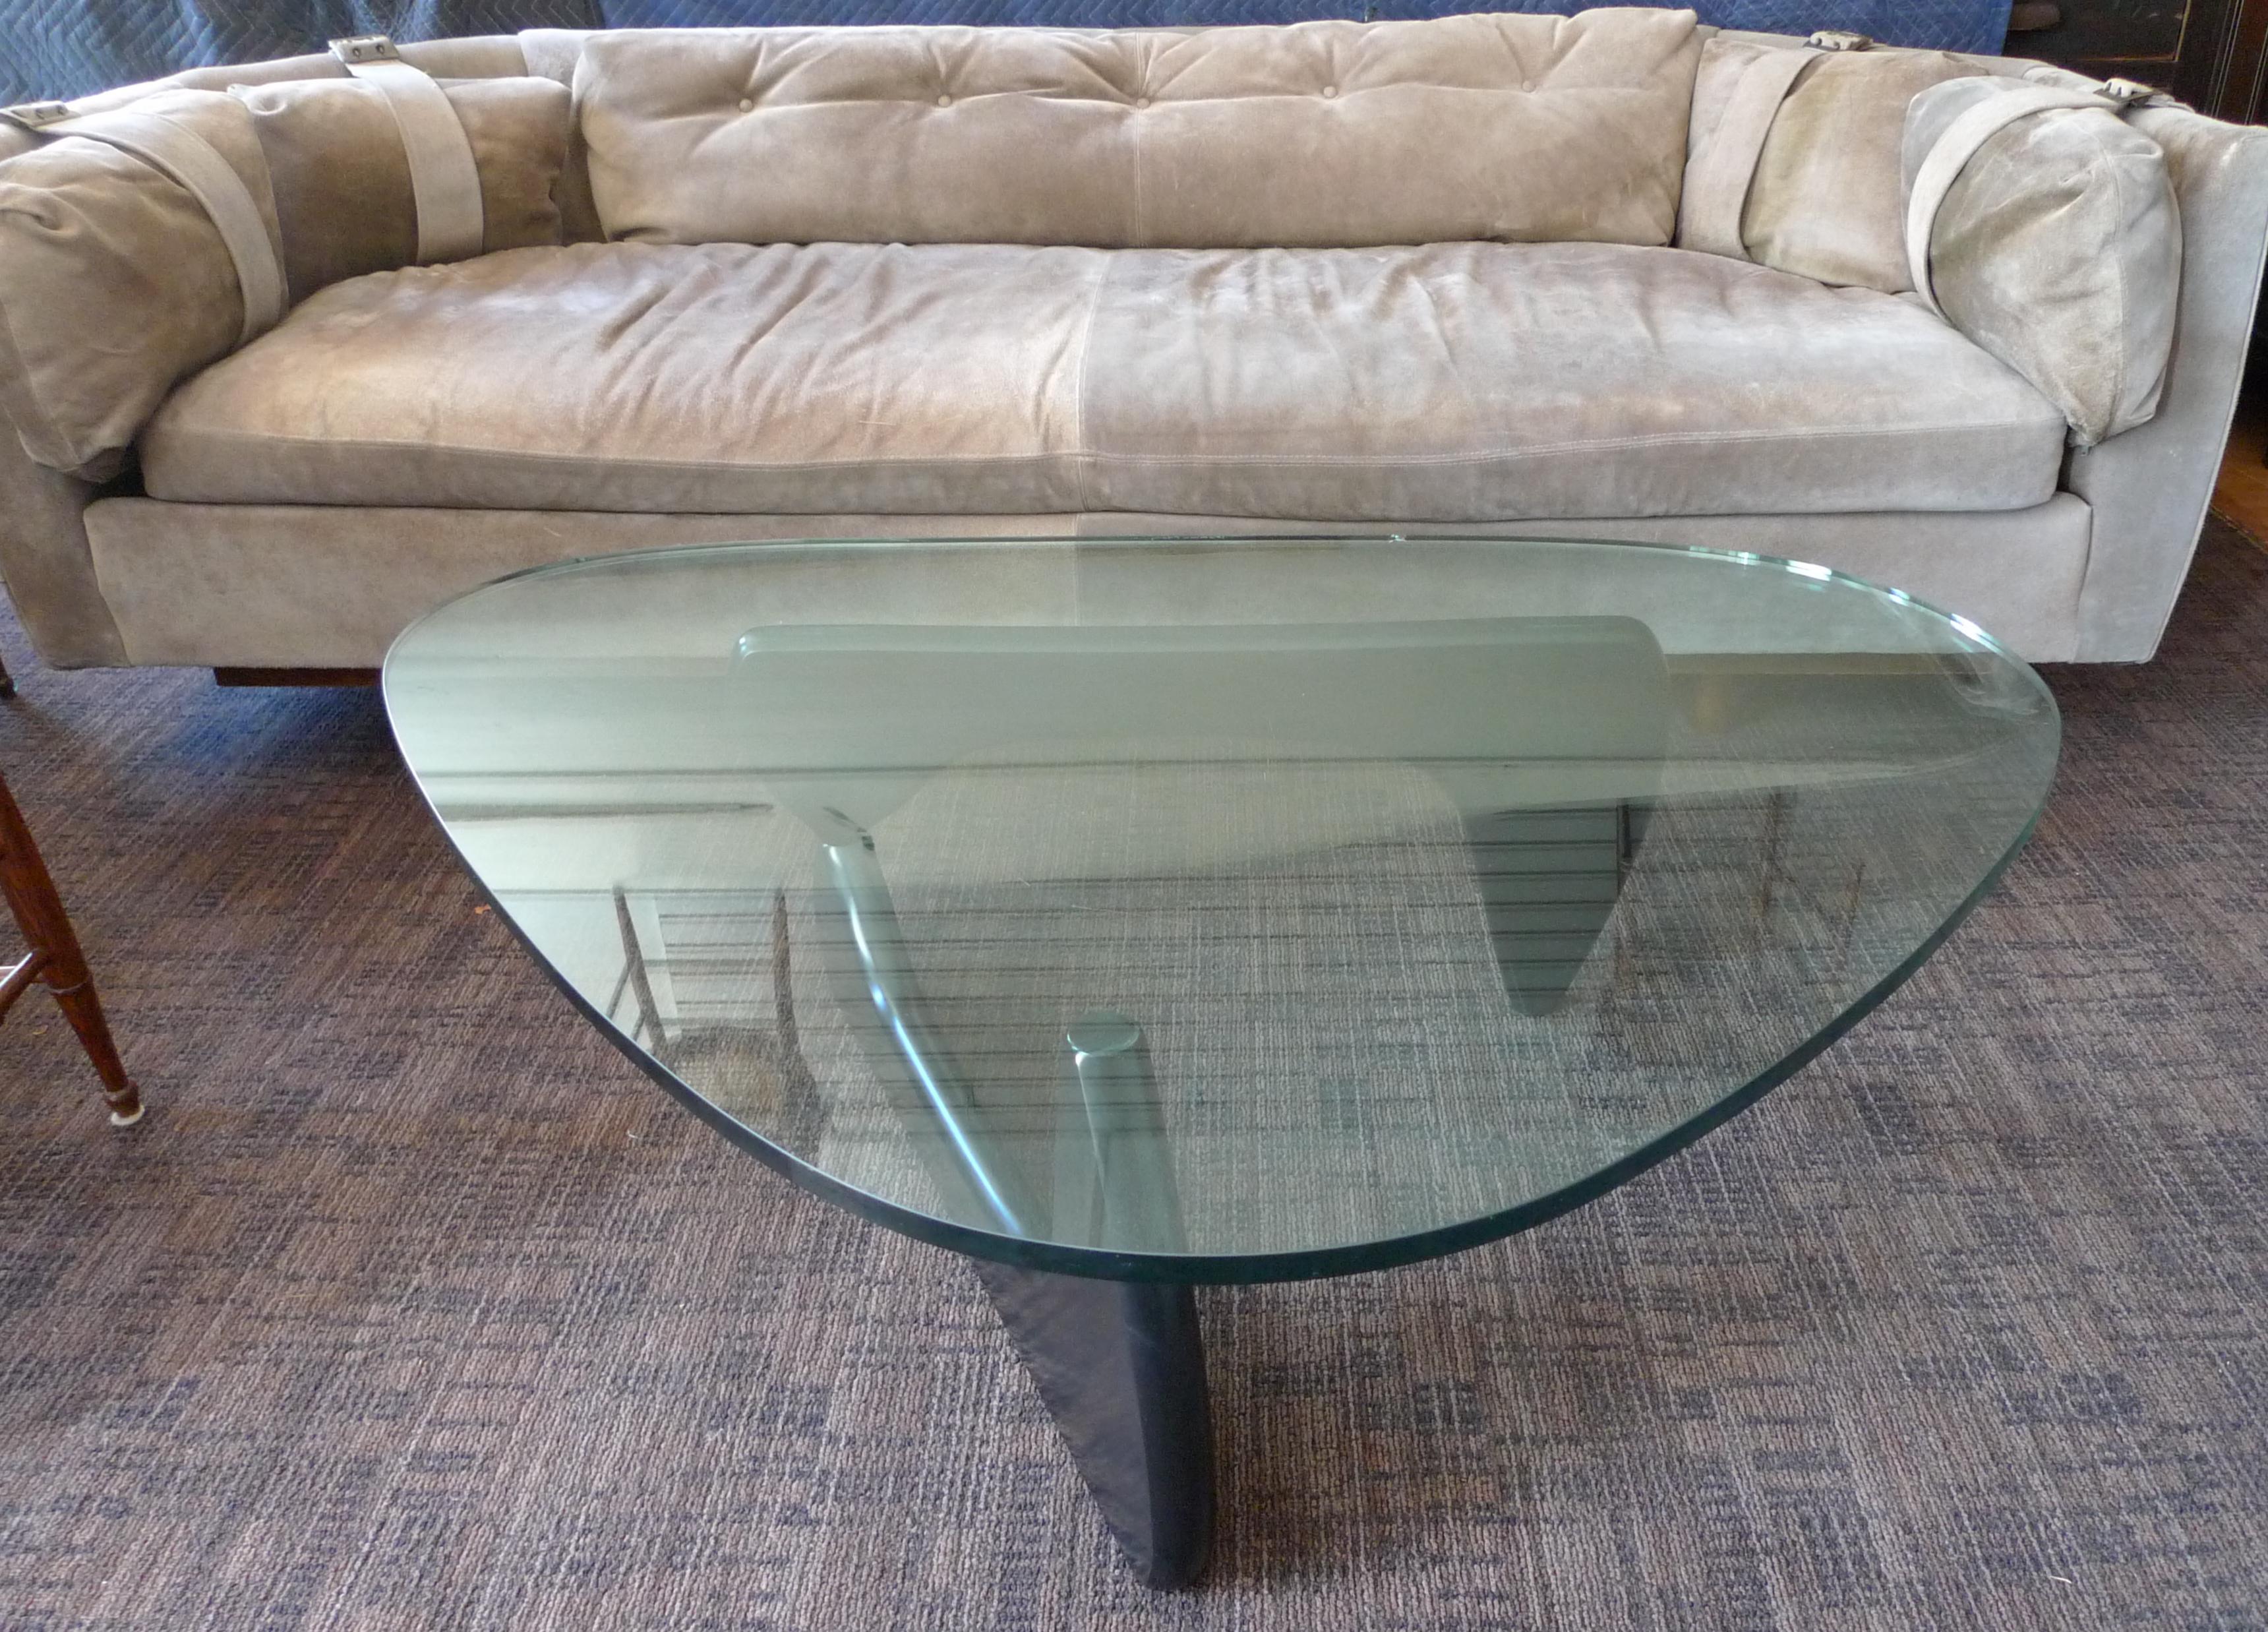 American Coffee Table IN-50 Designed by Isamu Noguchi for Herman Miller, circa 1940s